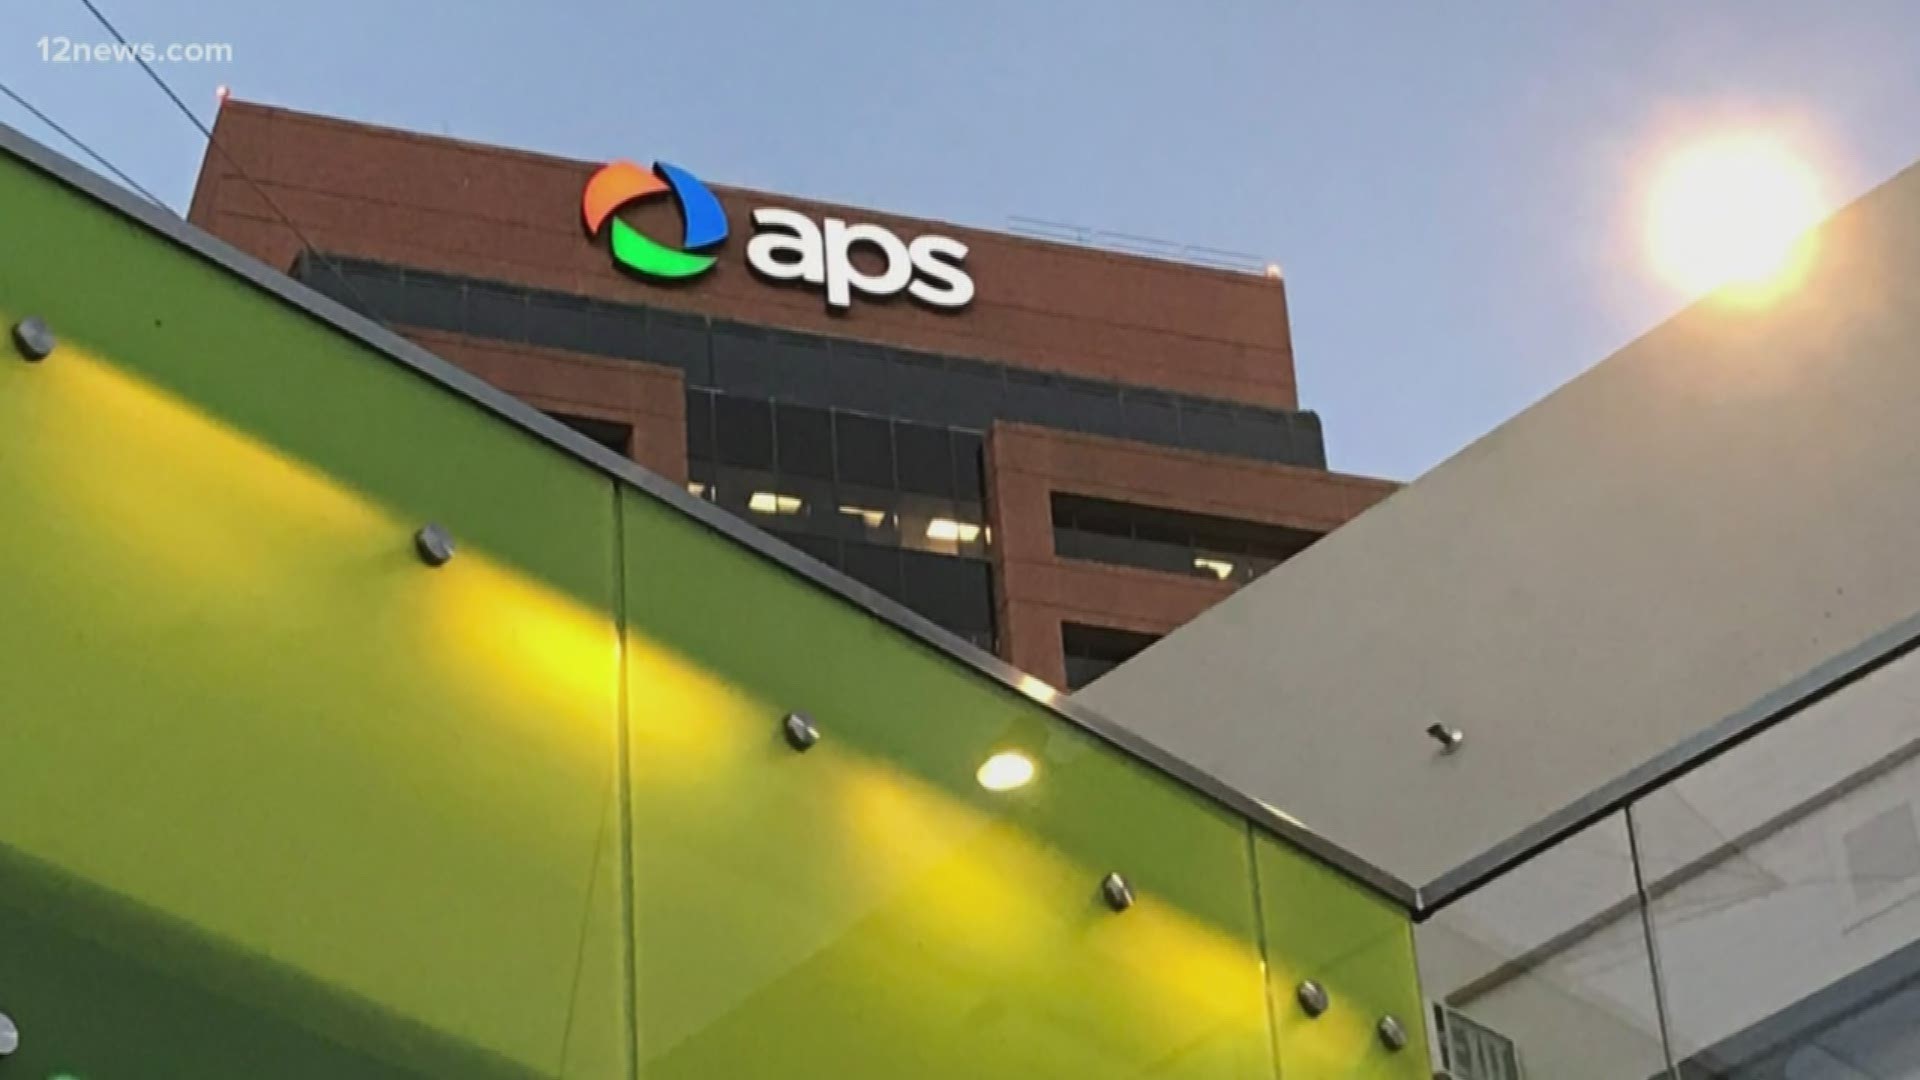 APS revealed that it spent $450,000 on ads that could influence education policy. Did the money for the commercials come from ower customers?